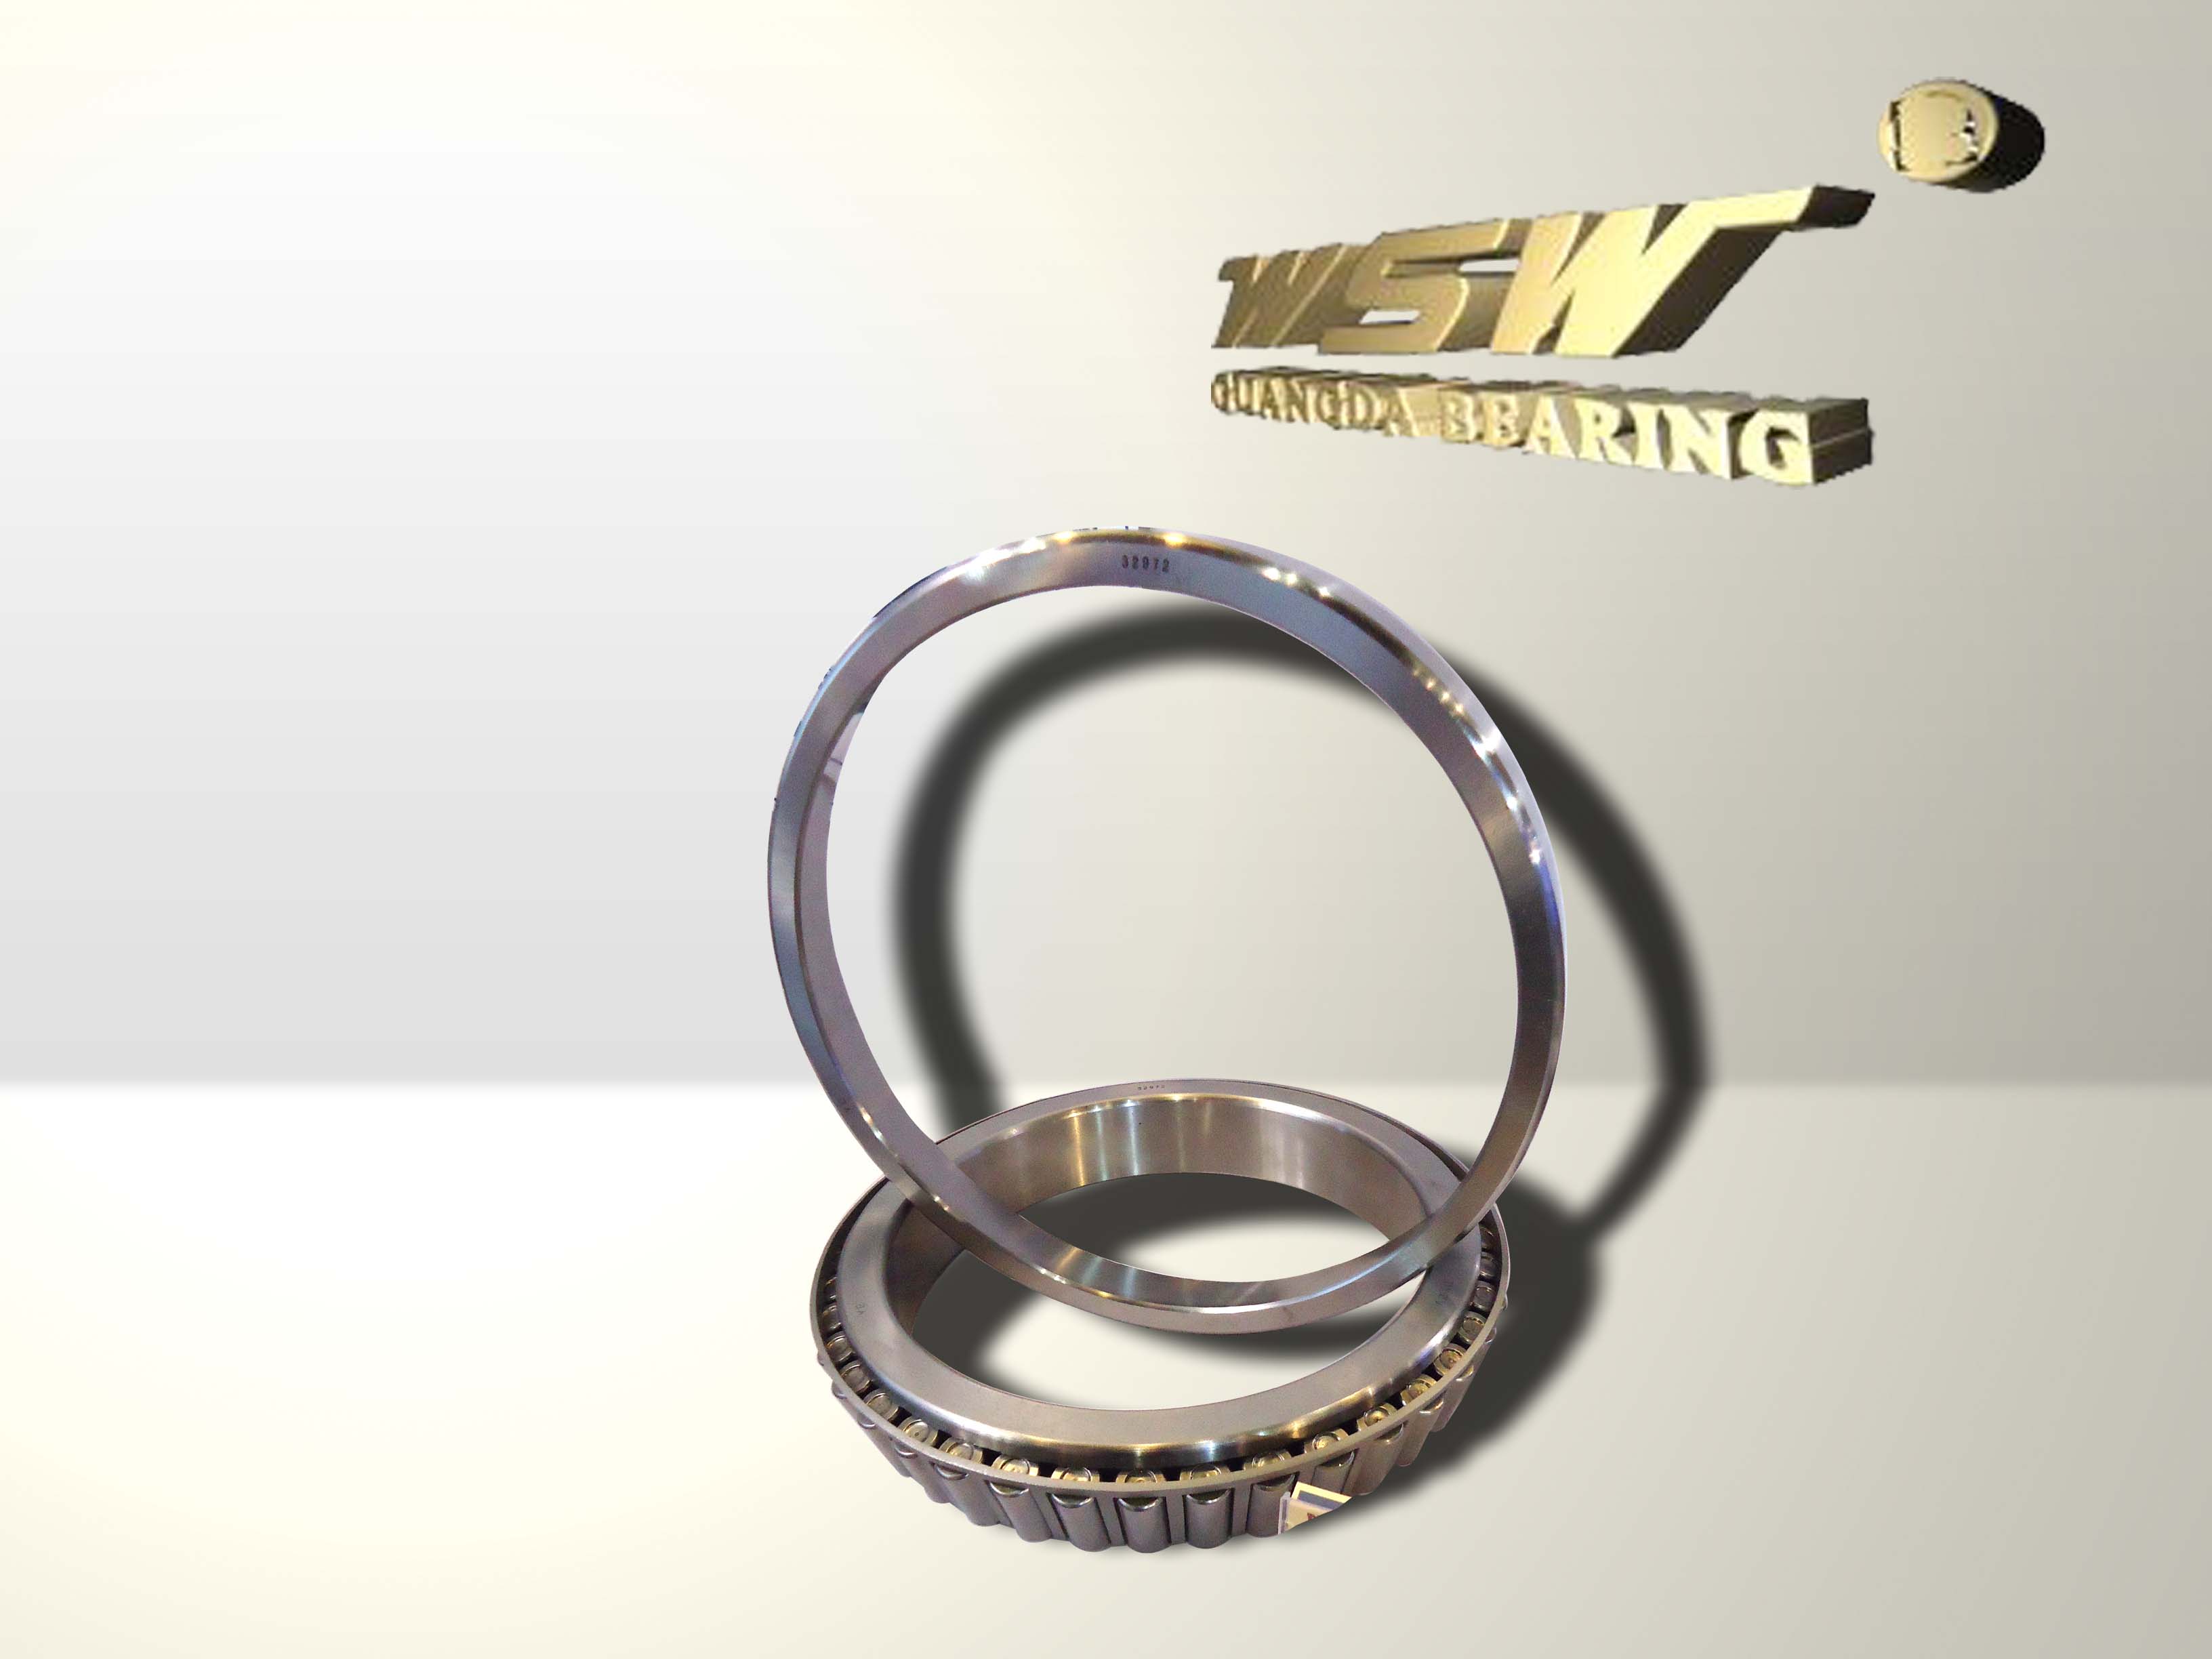 hh144642/hh144614 Tapered Roller Bearing